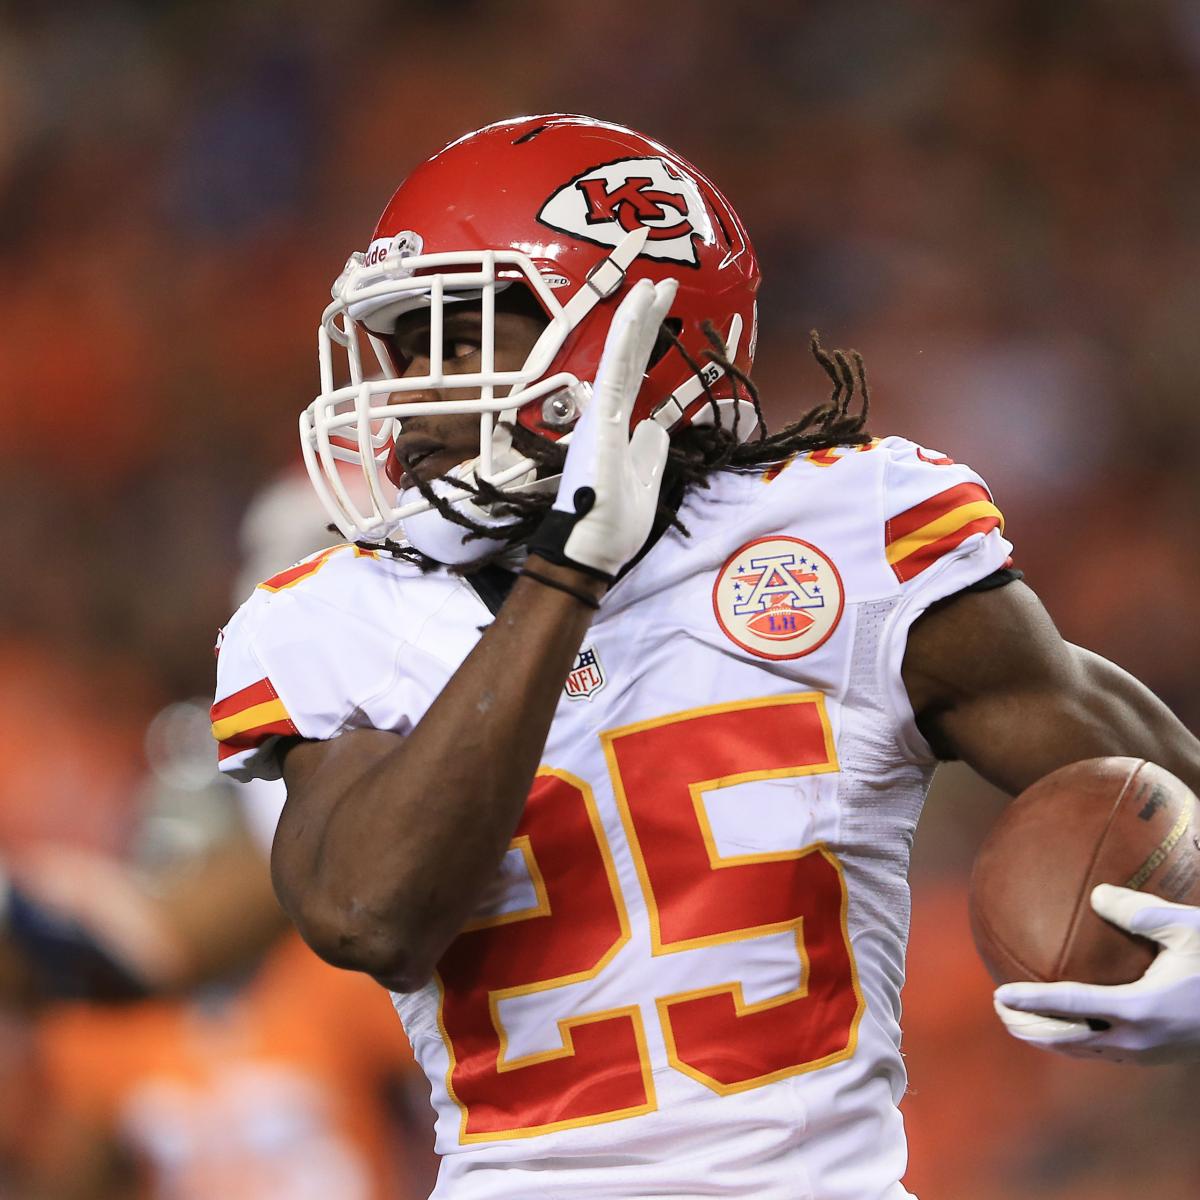 Fantasy Football 2014: Top Players, PPR Draft Strategy and Mock Draft